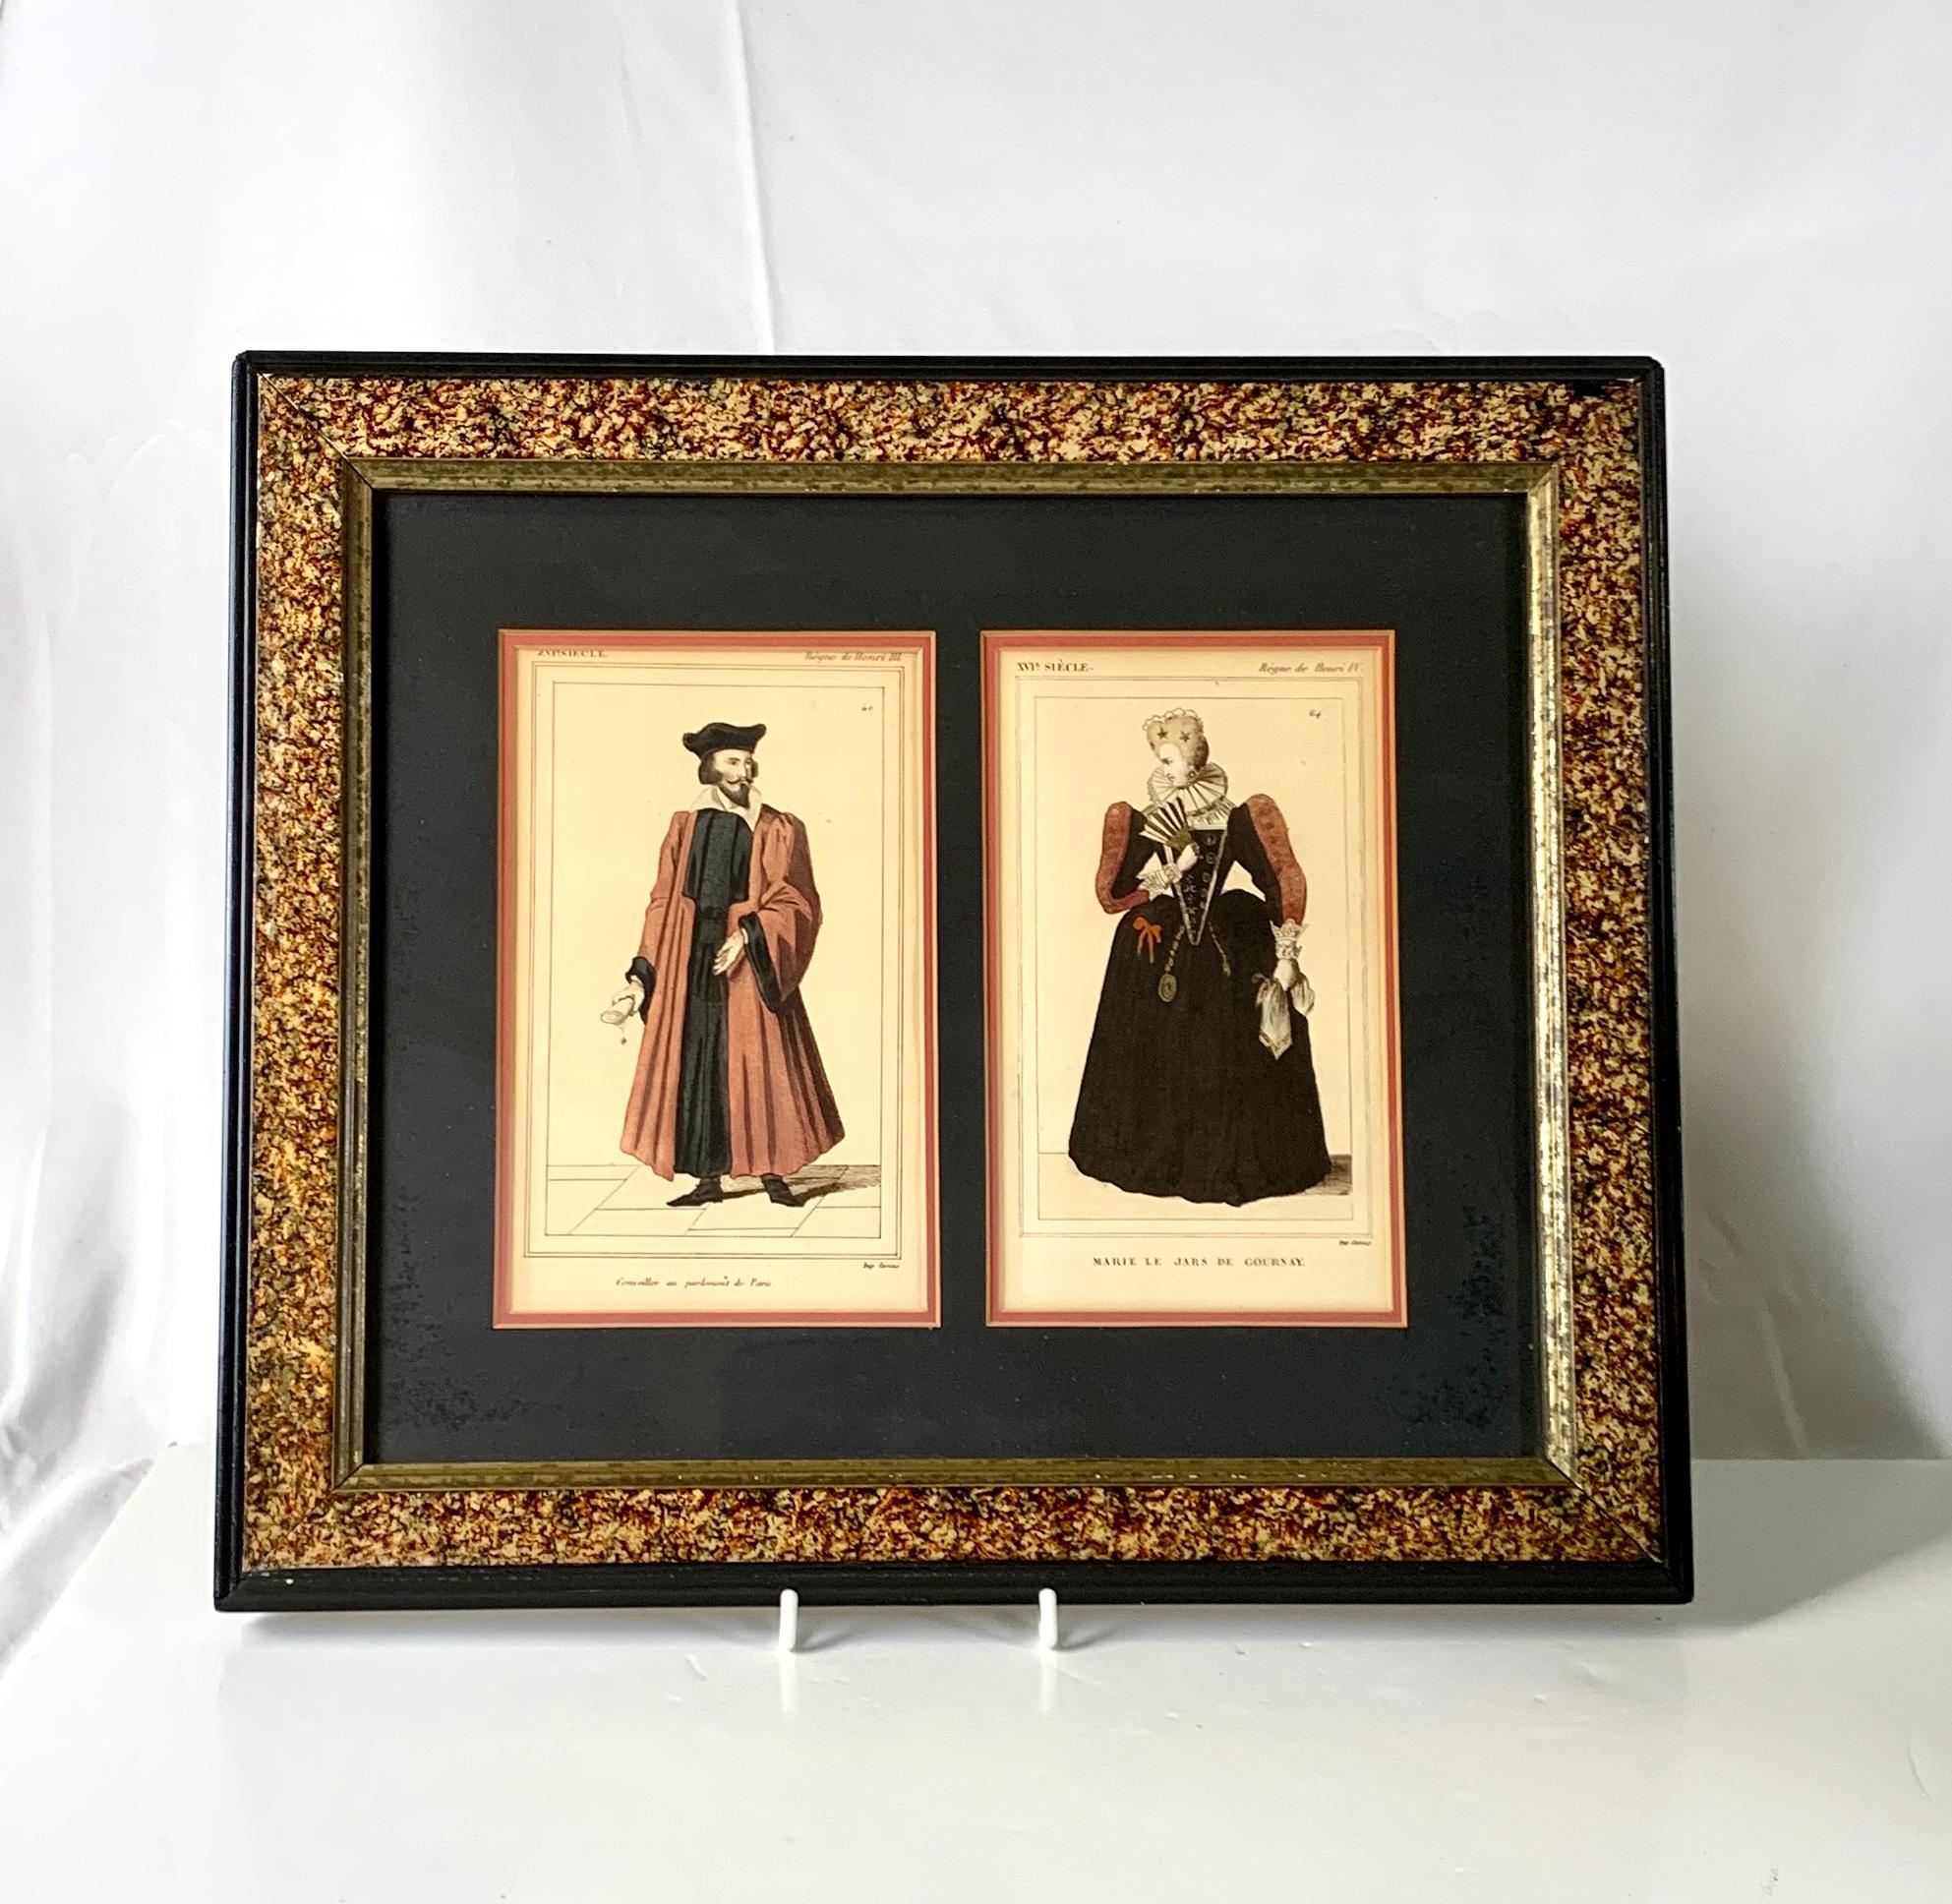 A pair of outstanding prints of French nobles of the 16th century. The costumes are exquisite!
The captions under each figure indicate that the figures and their costumes were from the period of Henri III and Henri IV, Kings of France, 
The stylish